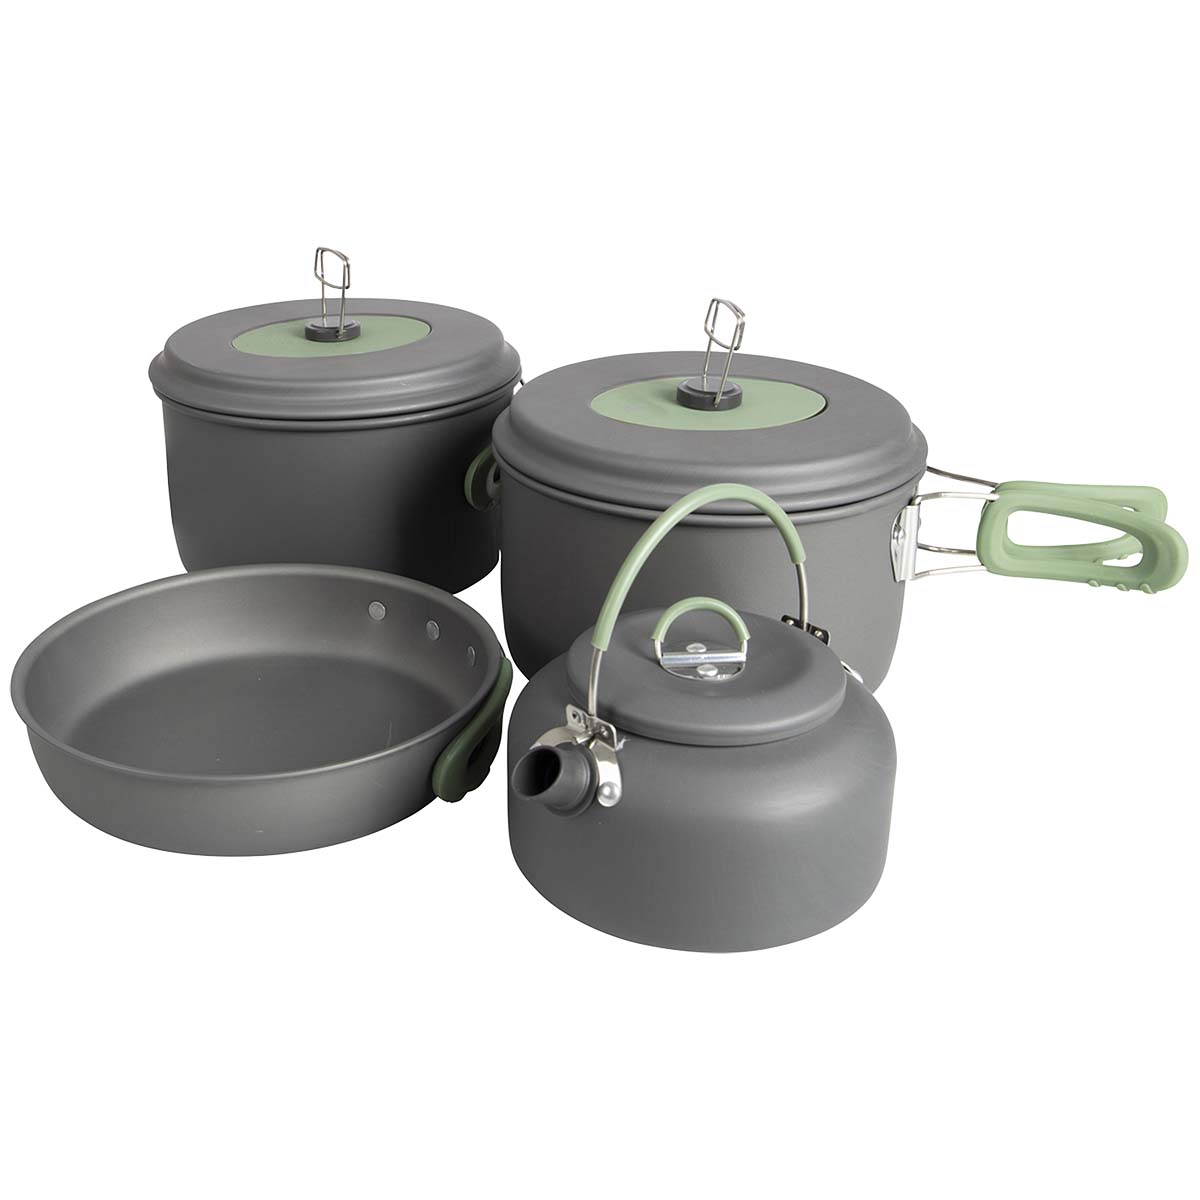 2200249 A complete and spacious 4-piece lightweight cookware set. Consisting of 2 cooking pans, a frying pan and a tea kettle with a capacity of 0.8 liters. Ideally suited for outdoor use. The set is equipped with heat-resistant and foldable handles made of silicone. Made of solid hard anodized aluminum so there is a reduced chance of firing. Suitable for gas and gasoline burners. The pans can be stacked together making them compact to store and transport, including carrying bag. Dimensions of saucepans (Ø): 16.5x10.5 and 18.5x10 cm. Contents of saucepans: 1.4 and 2.2 litres. Dimensions frying pan (Ø): 19 cm. Frying pan capacity: 1.25 litres. Tea kettle capacity: 0.8 litres.